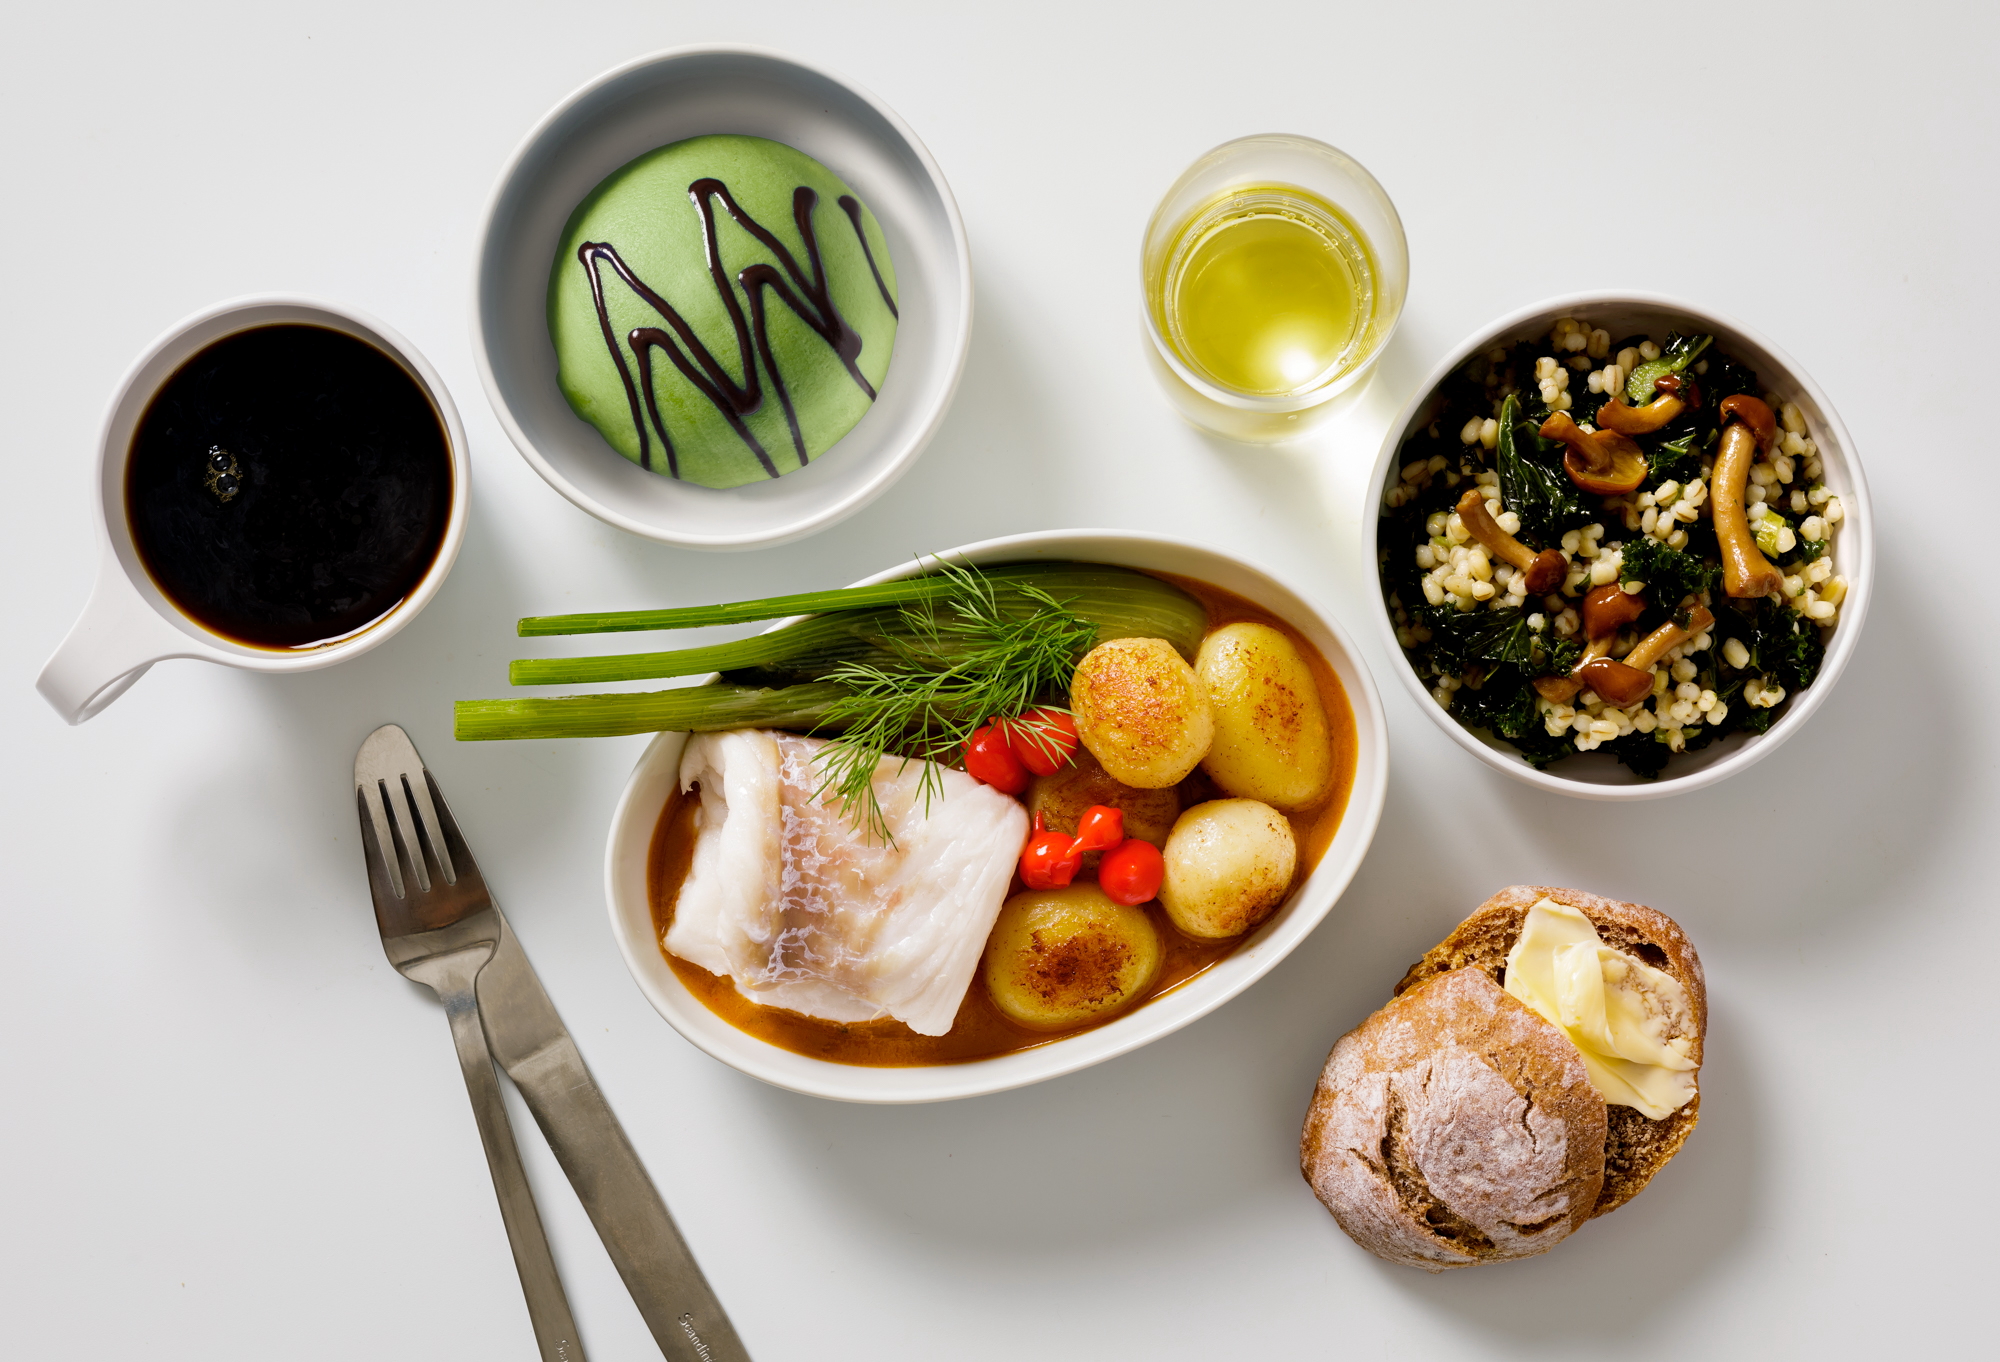 SAS Go travelers will be able to upgrade their dining experience by pre-ordering premium menus on long haul flights, from November 2018 onwards. Travelers will be able to choose from four freshly prepared menus. Each is a ‘Premium set menu’, featuring original, fresh dishes, including a seasonal starter, main course and dessert, as well as a choice of two drinks from a listed selection. Click to enlarge.